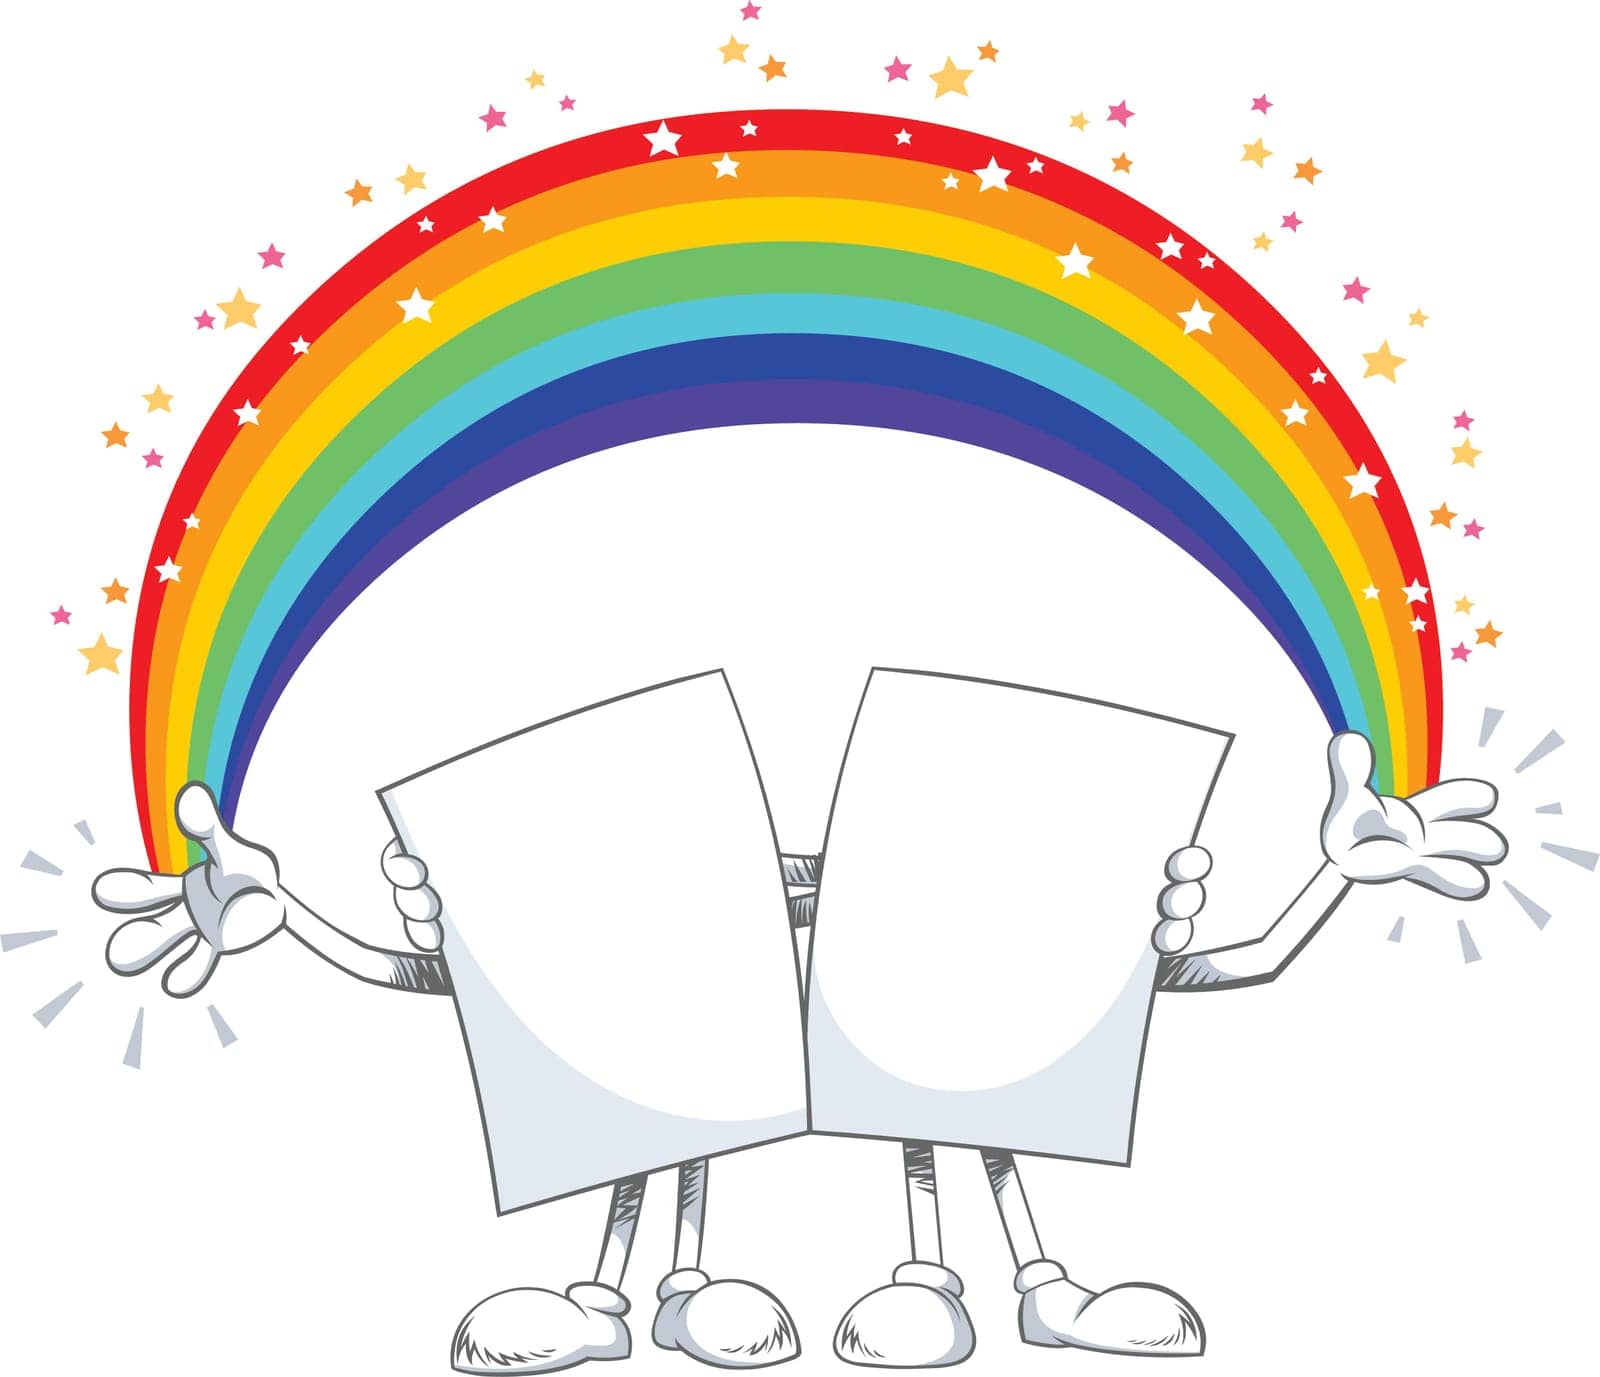 Color vector illustration of  Two Blank paper characters with a rainbow. Friendship and tolerance. Isolated on white background.